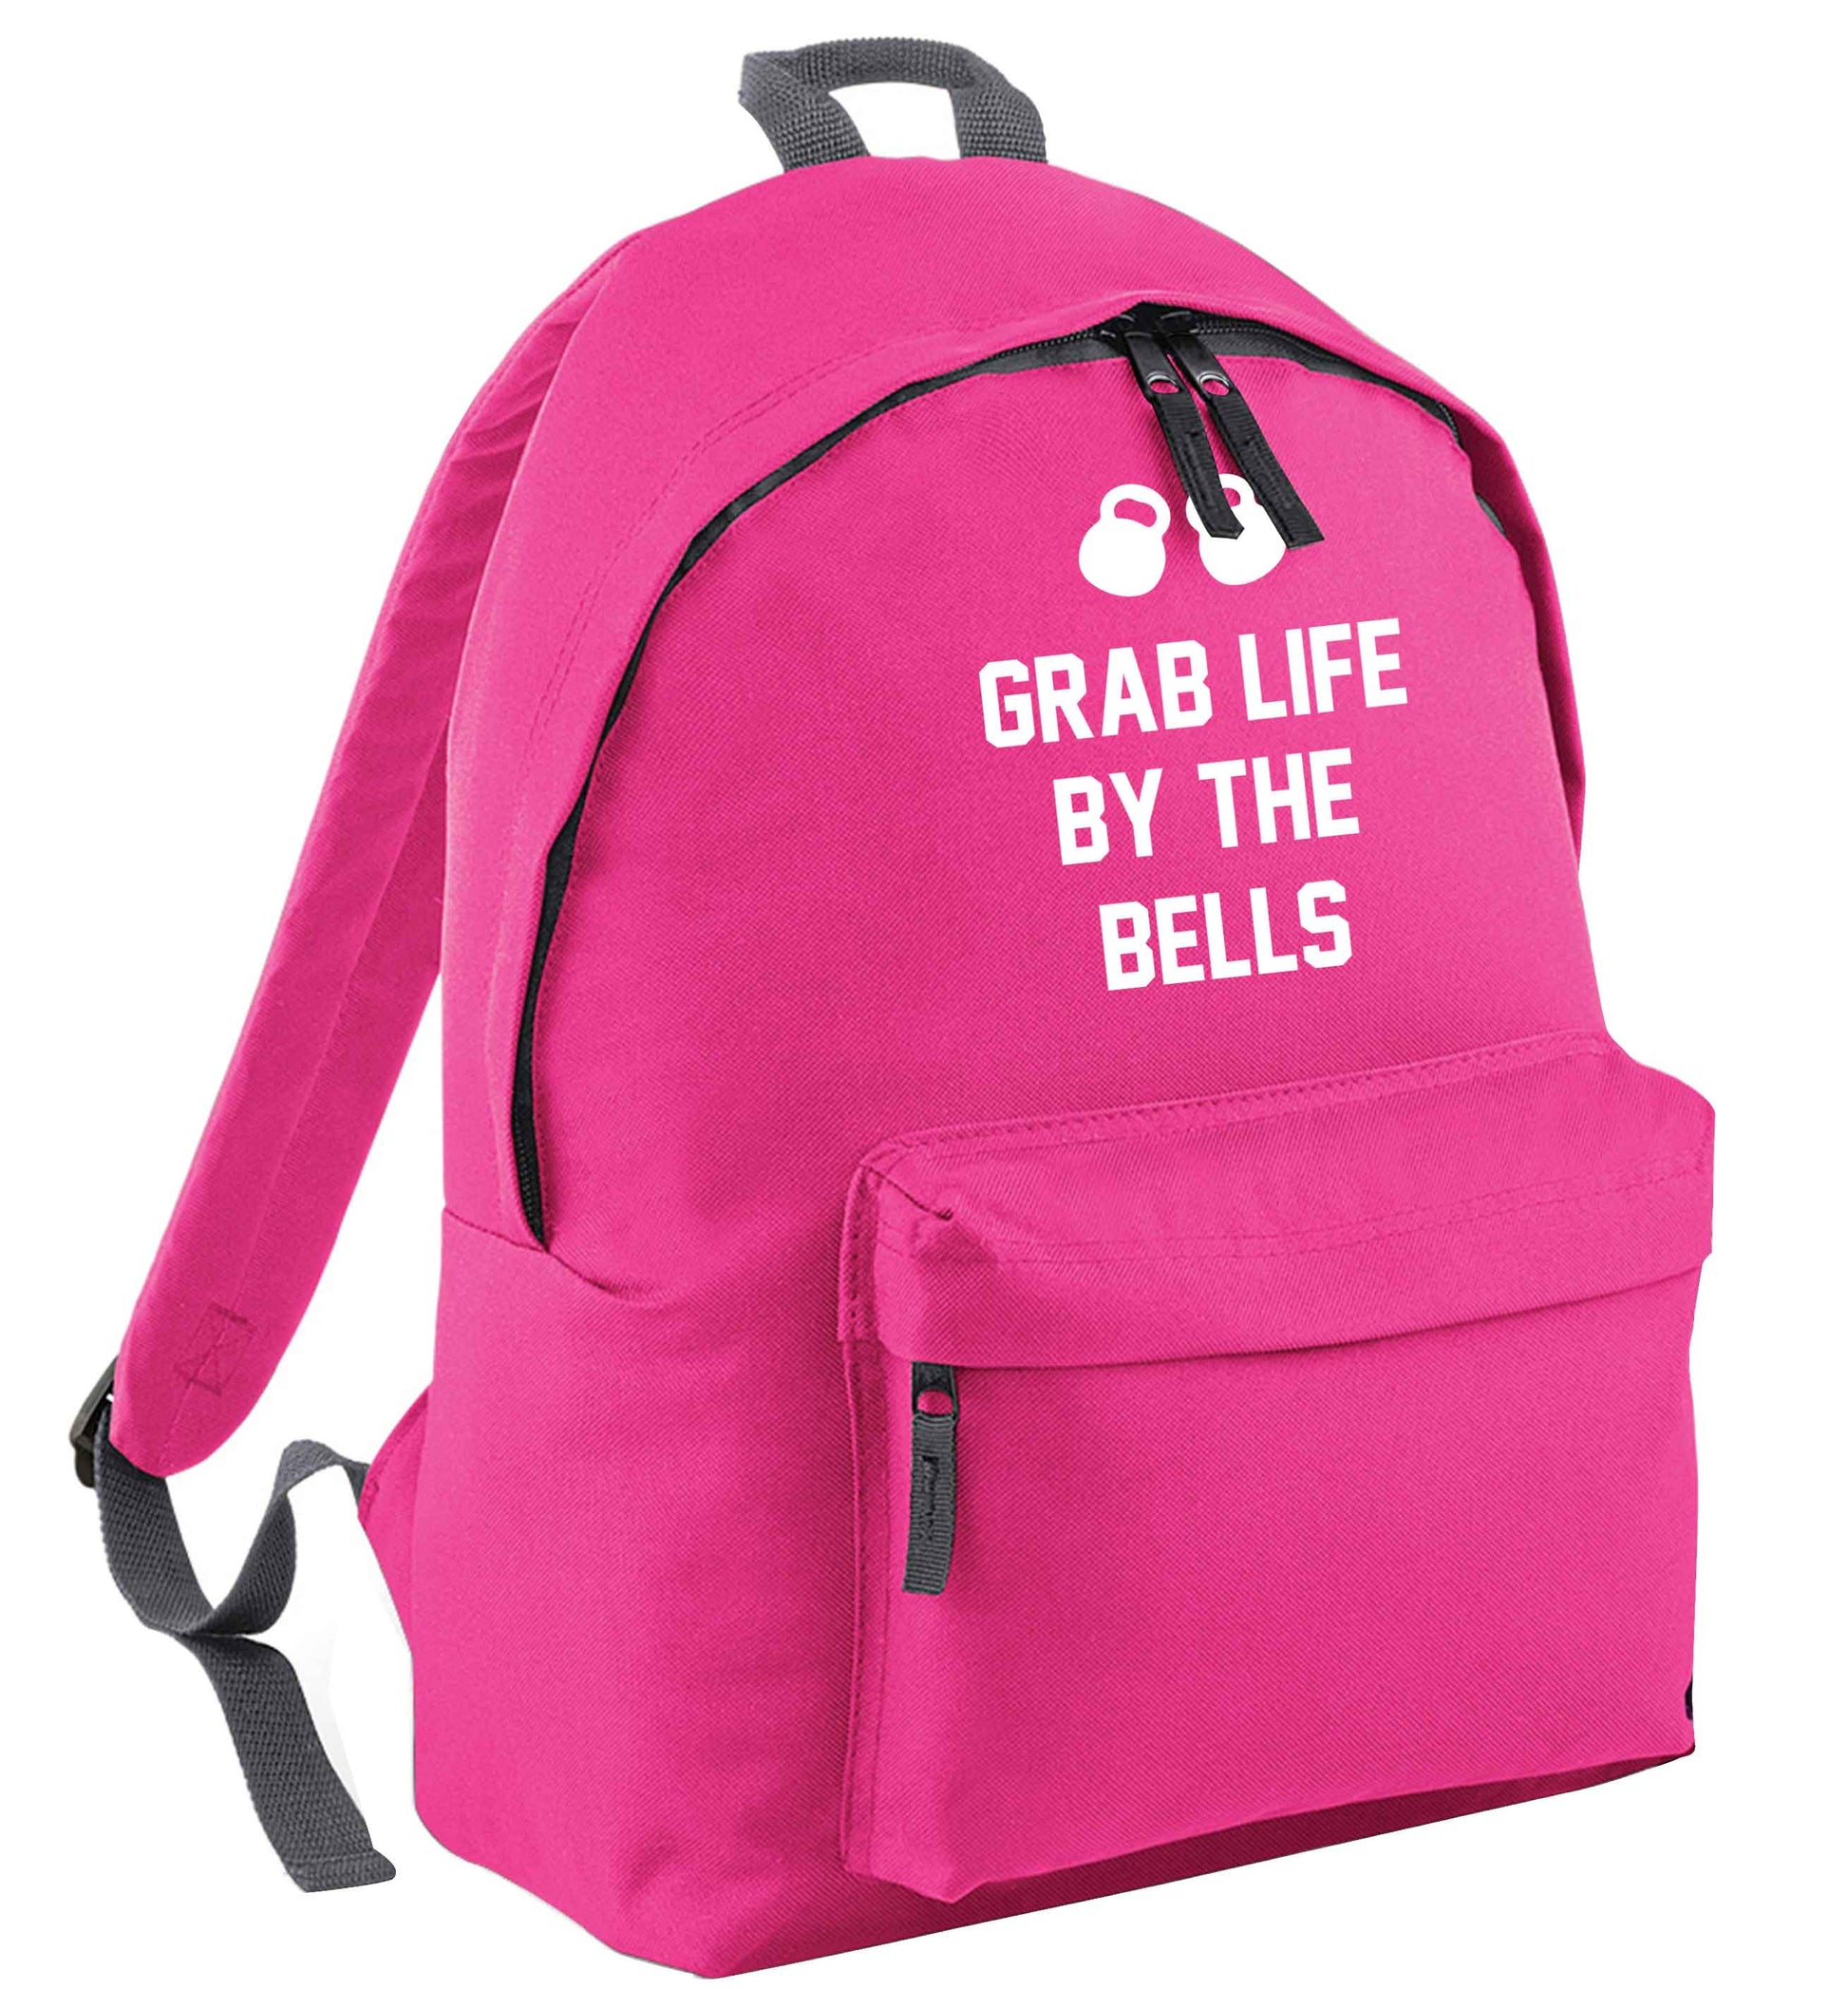 Grab life by the bells | Children's backpack